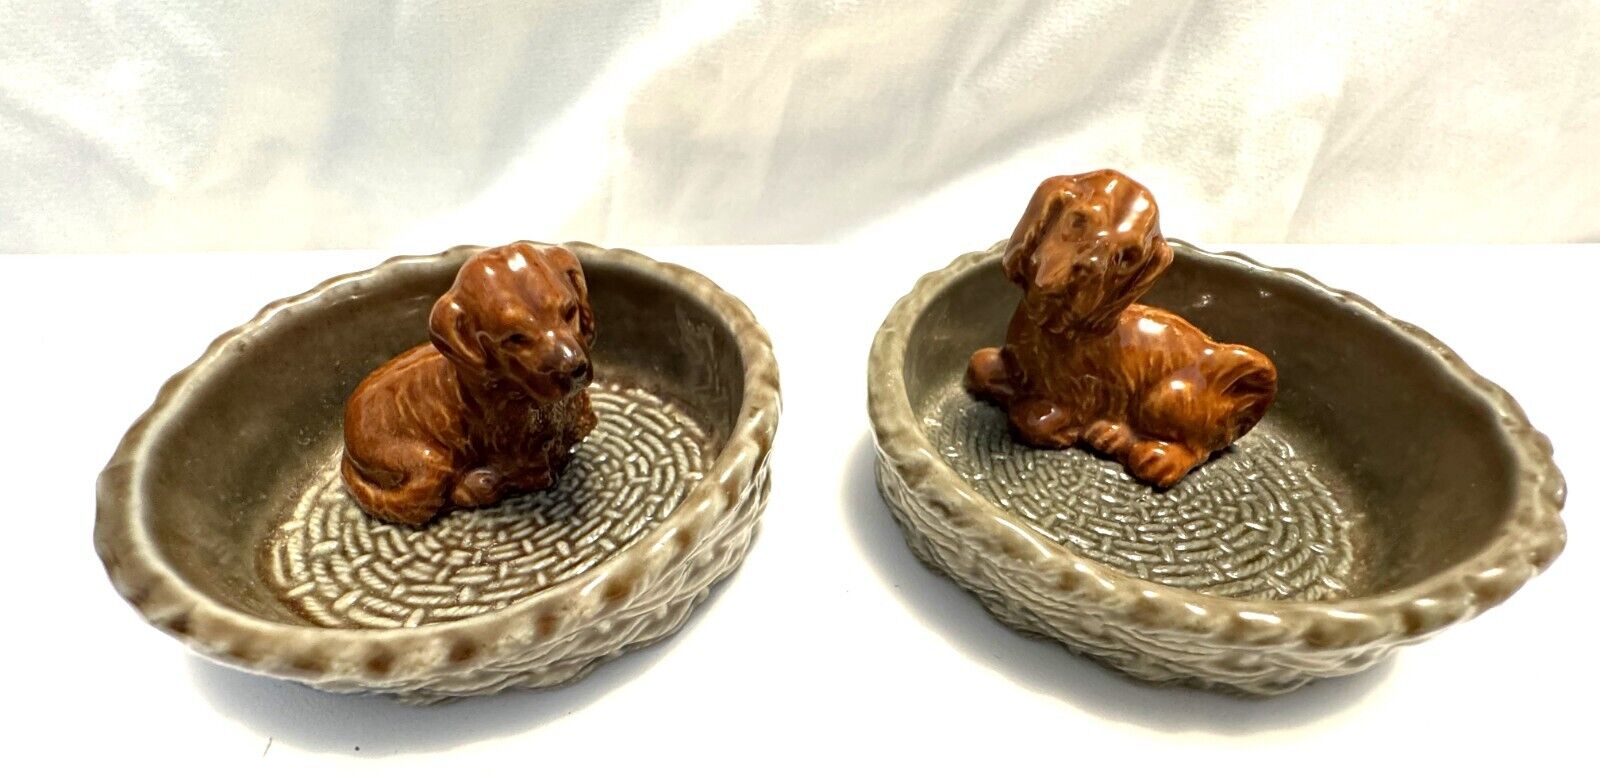 Wade Irish Red Setter Puppies Laying in Baskets  Dish Trinket 1974-1981 Special